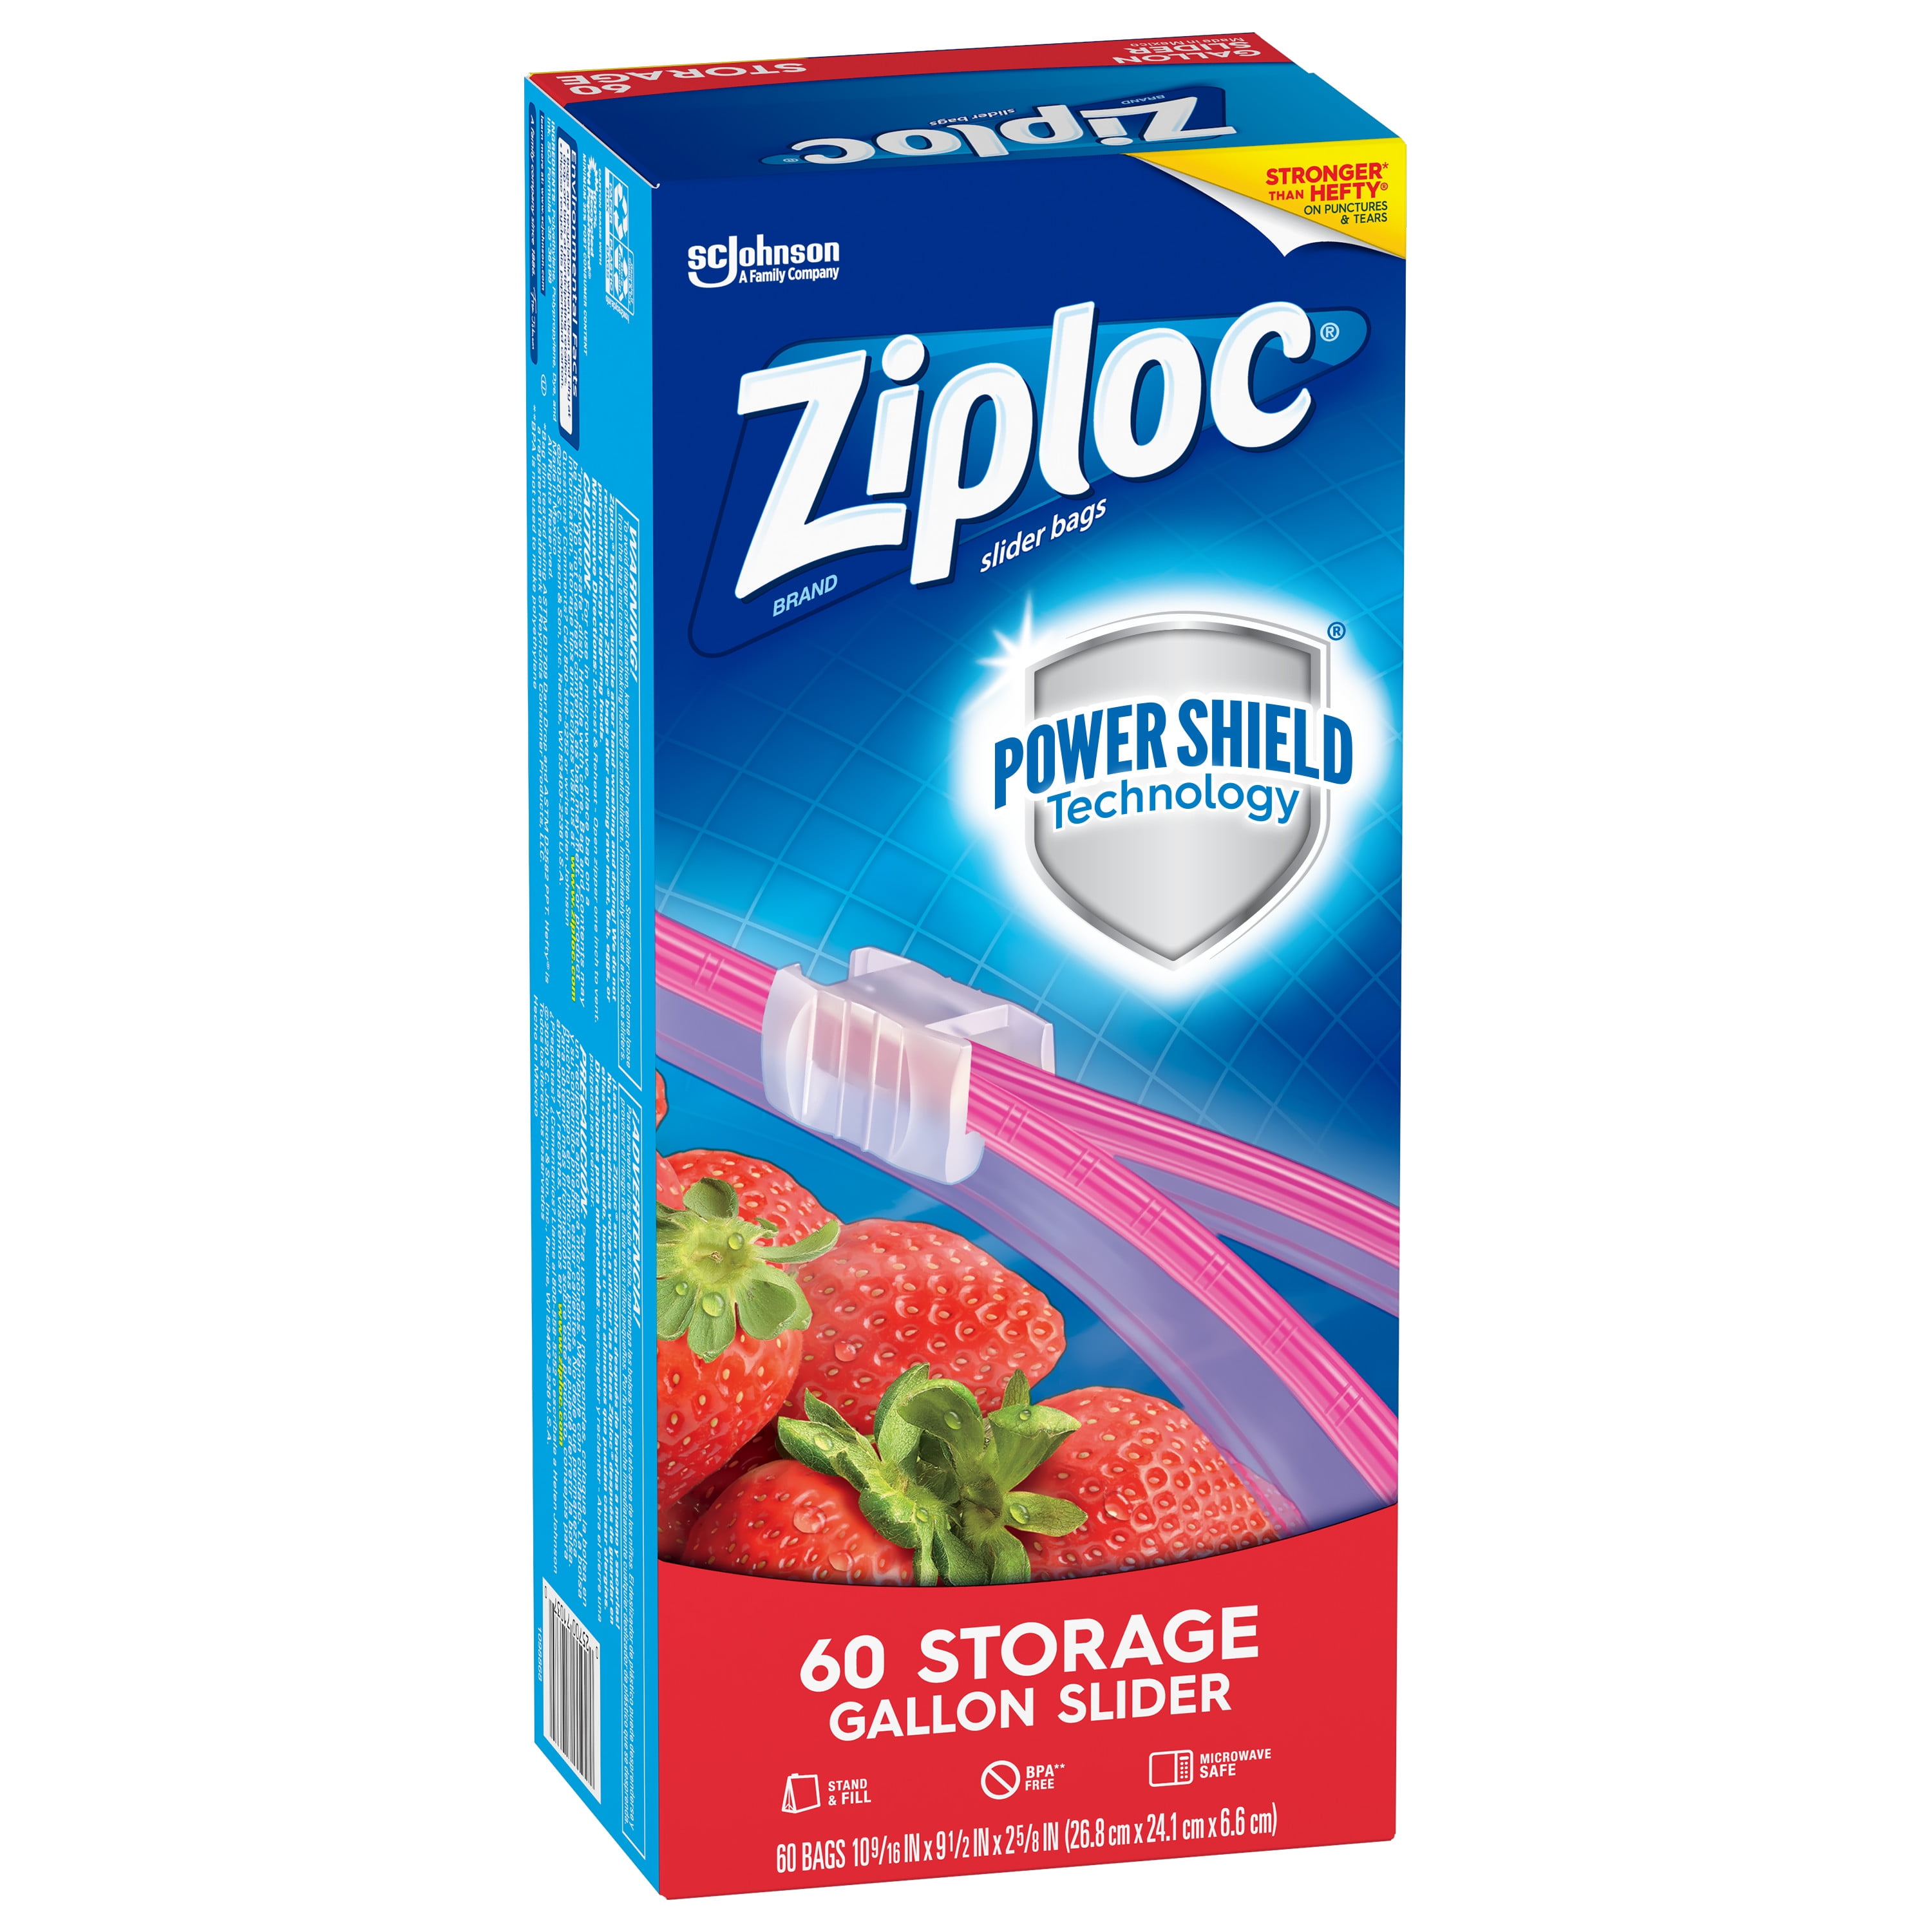 Ziploc Brand Slider Storage Gallon Bags with Power Shield Technology, Pack of 1 .40 Count 